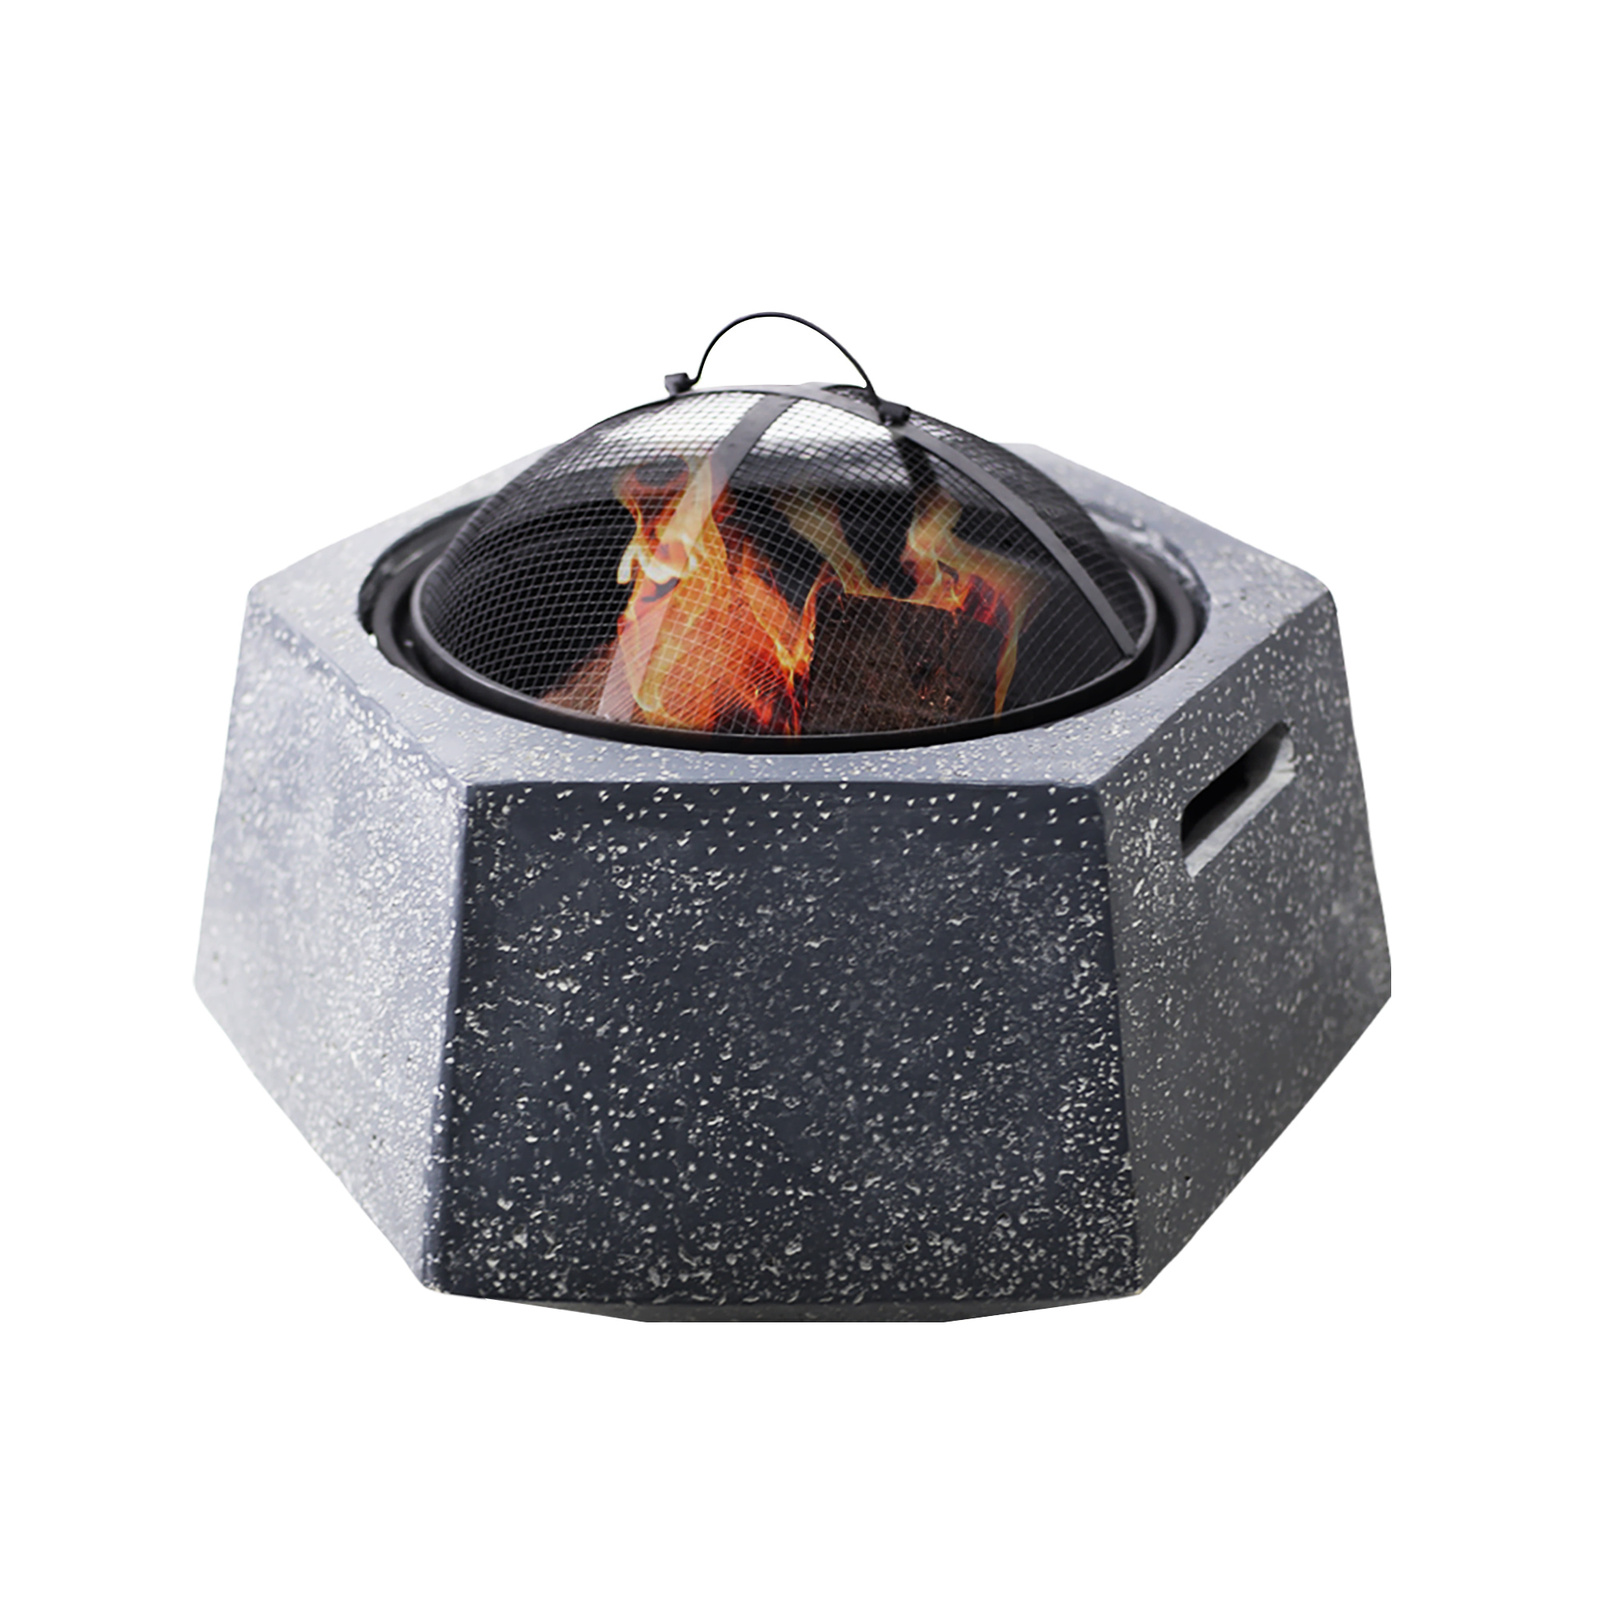 Outdoor Fire Pit Charcoal Bbq Grill Camping Patio Heater Fireplace